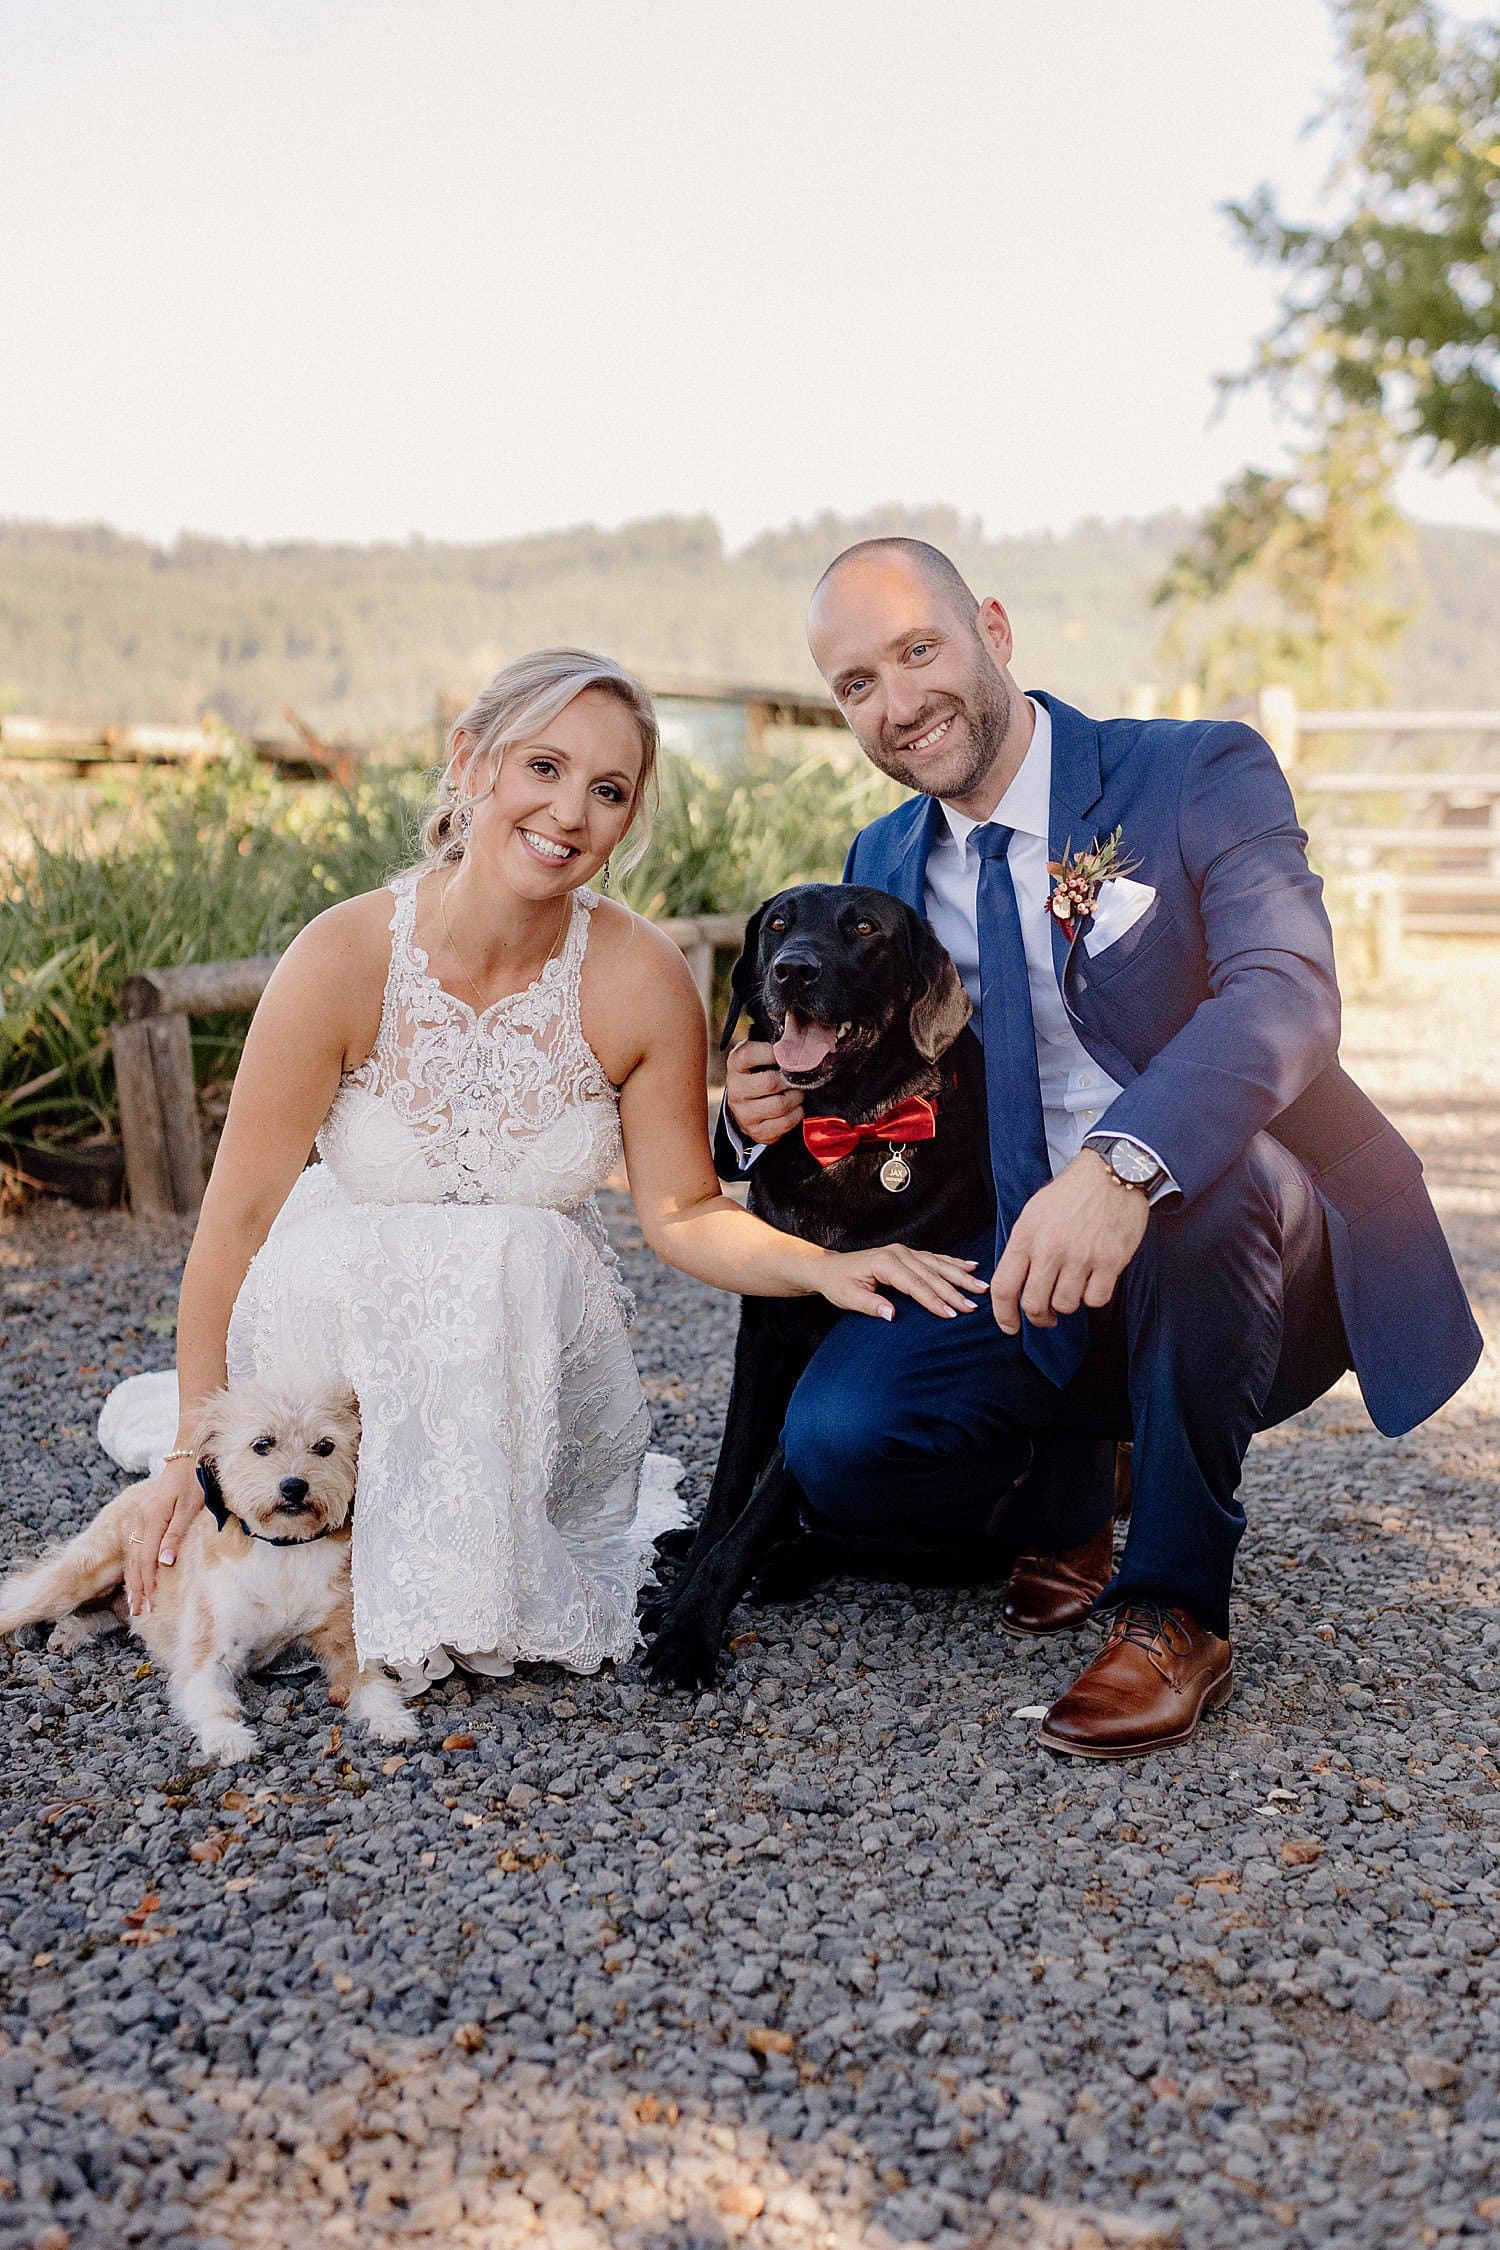 A bride and groom pose with their dogs at Abbey Road Farm.